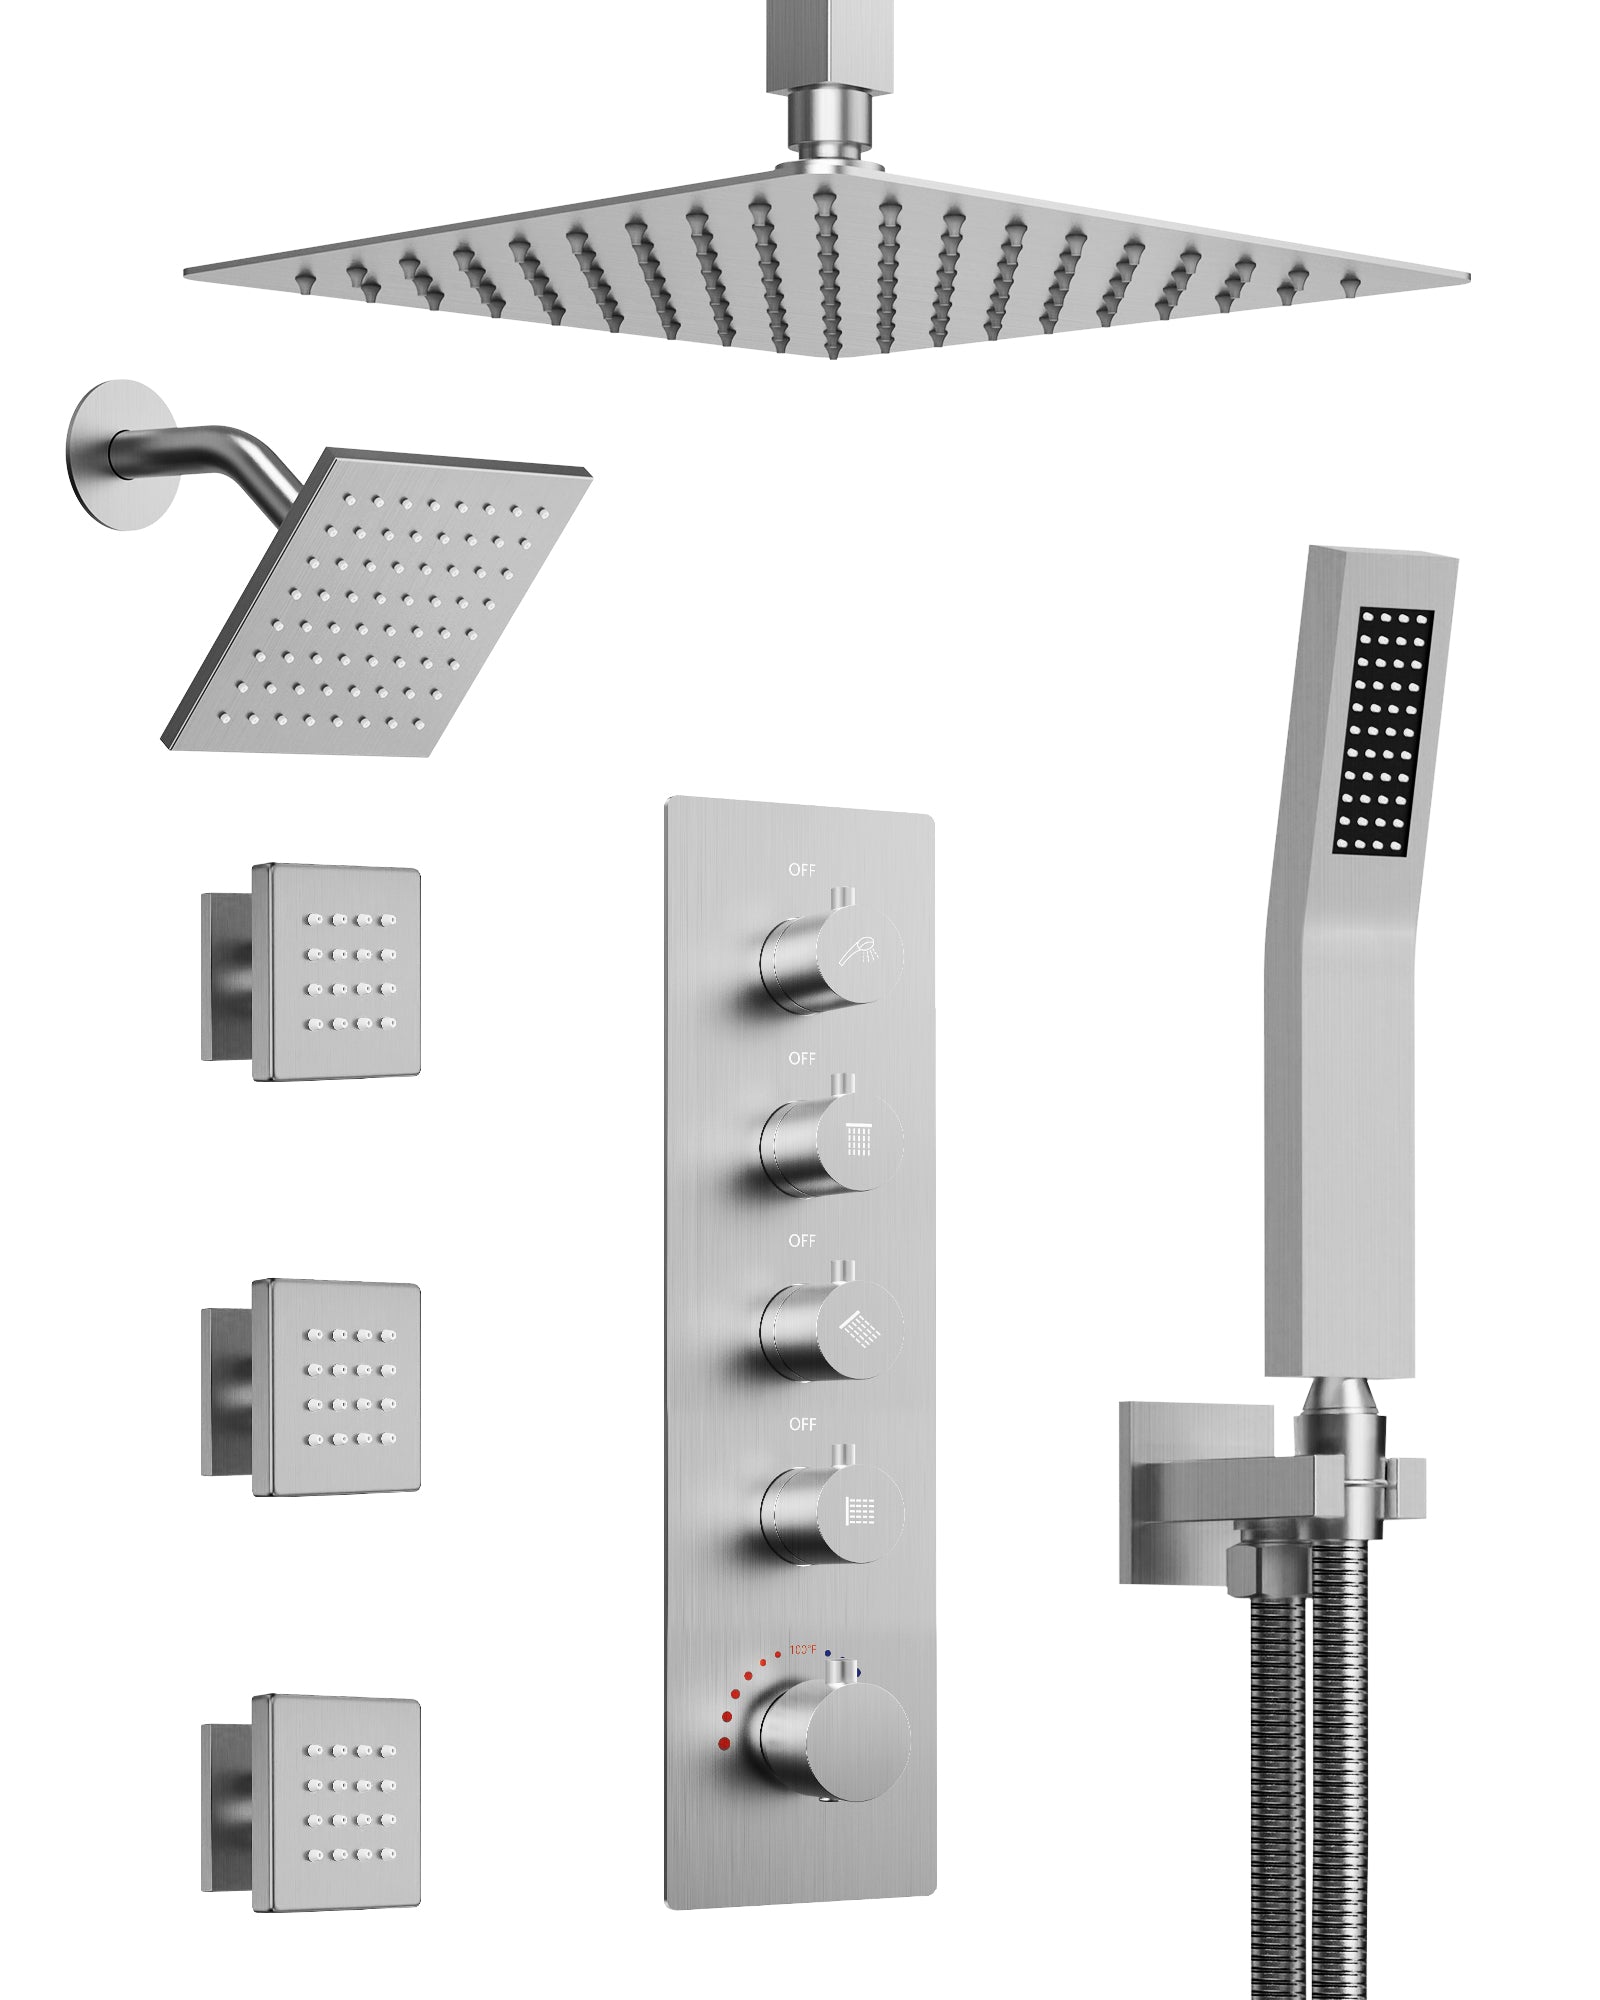 EVERSTEIN SFS-1063-NK16 16" High-Pressure Rainfall Complete Shower System with Rough-in Valve